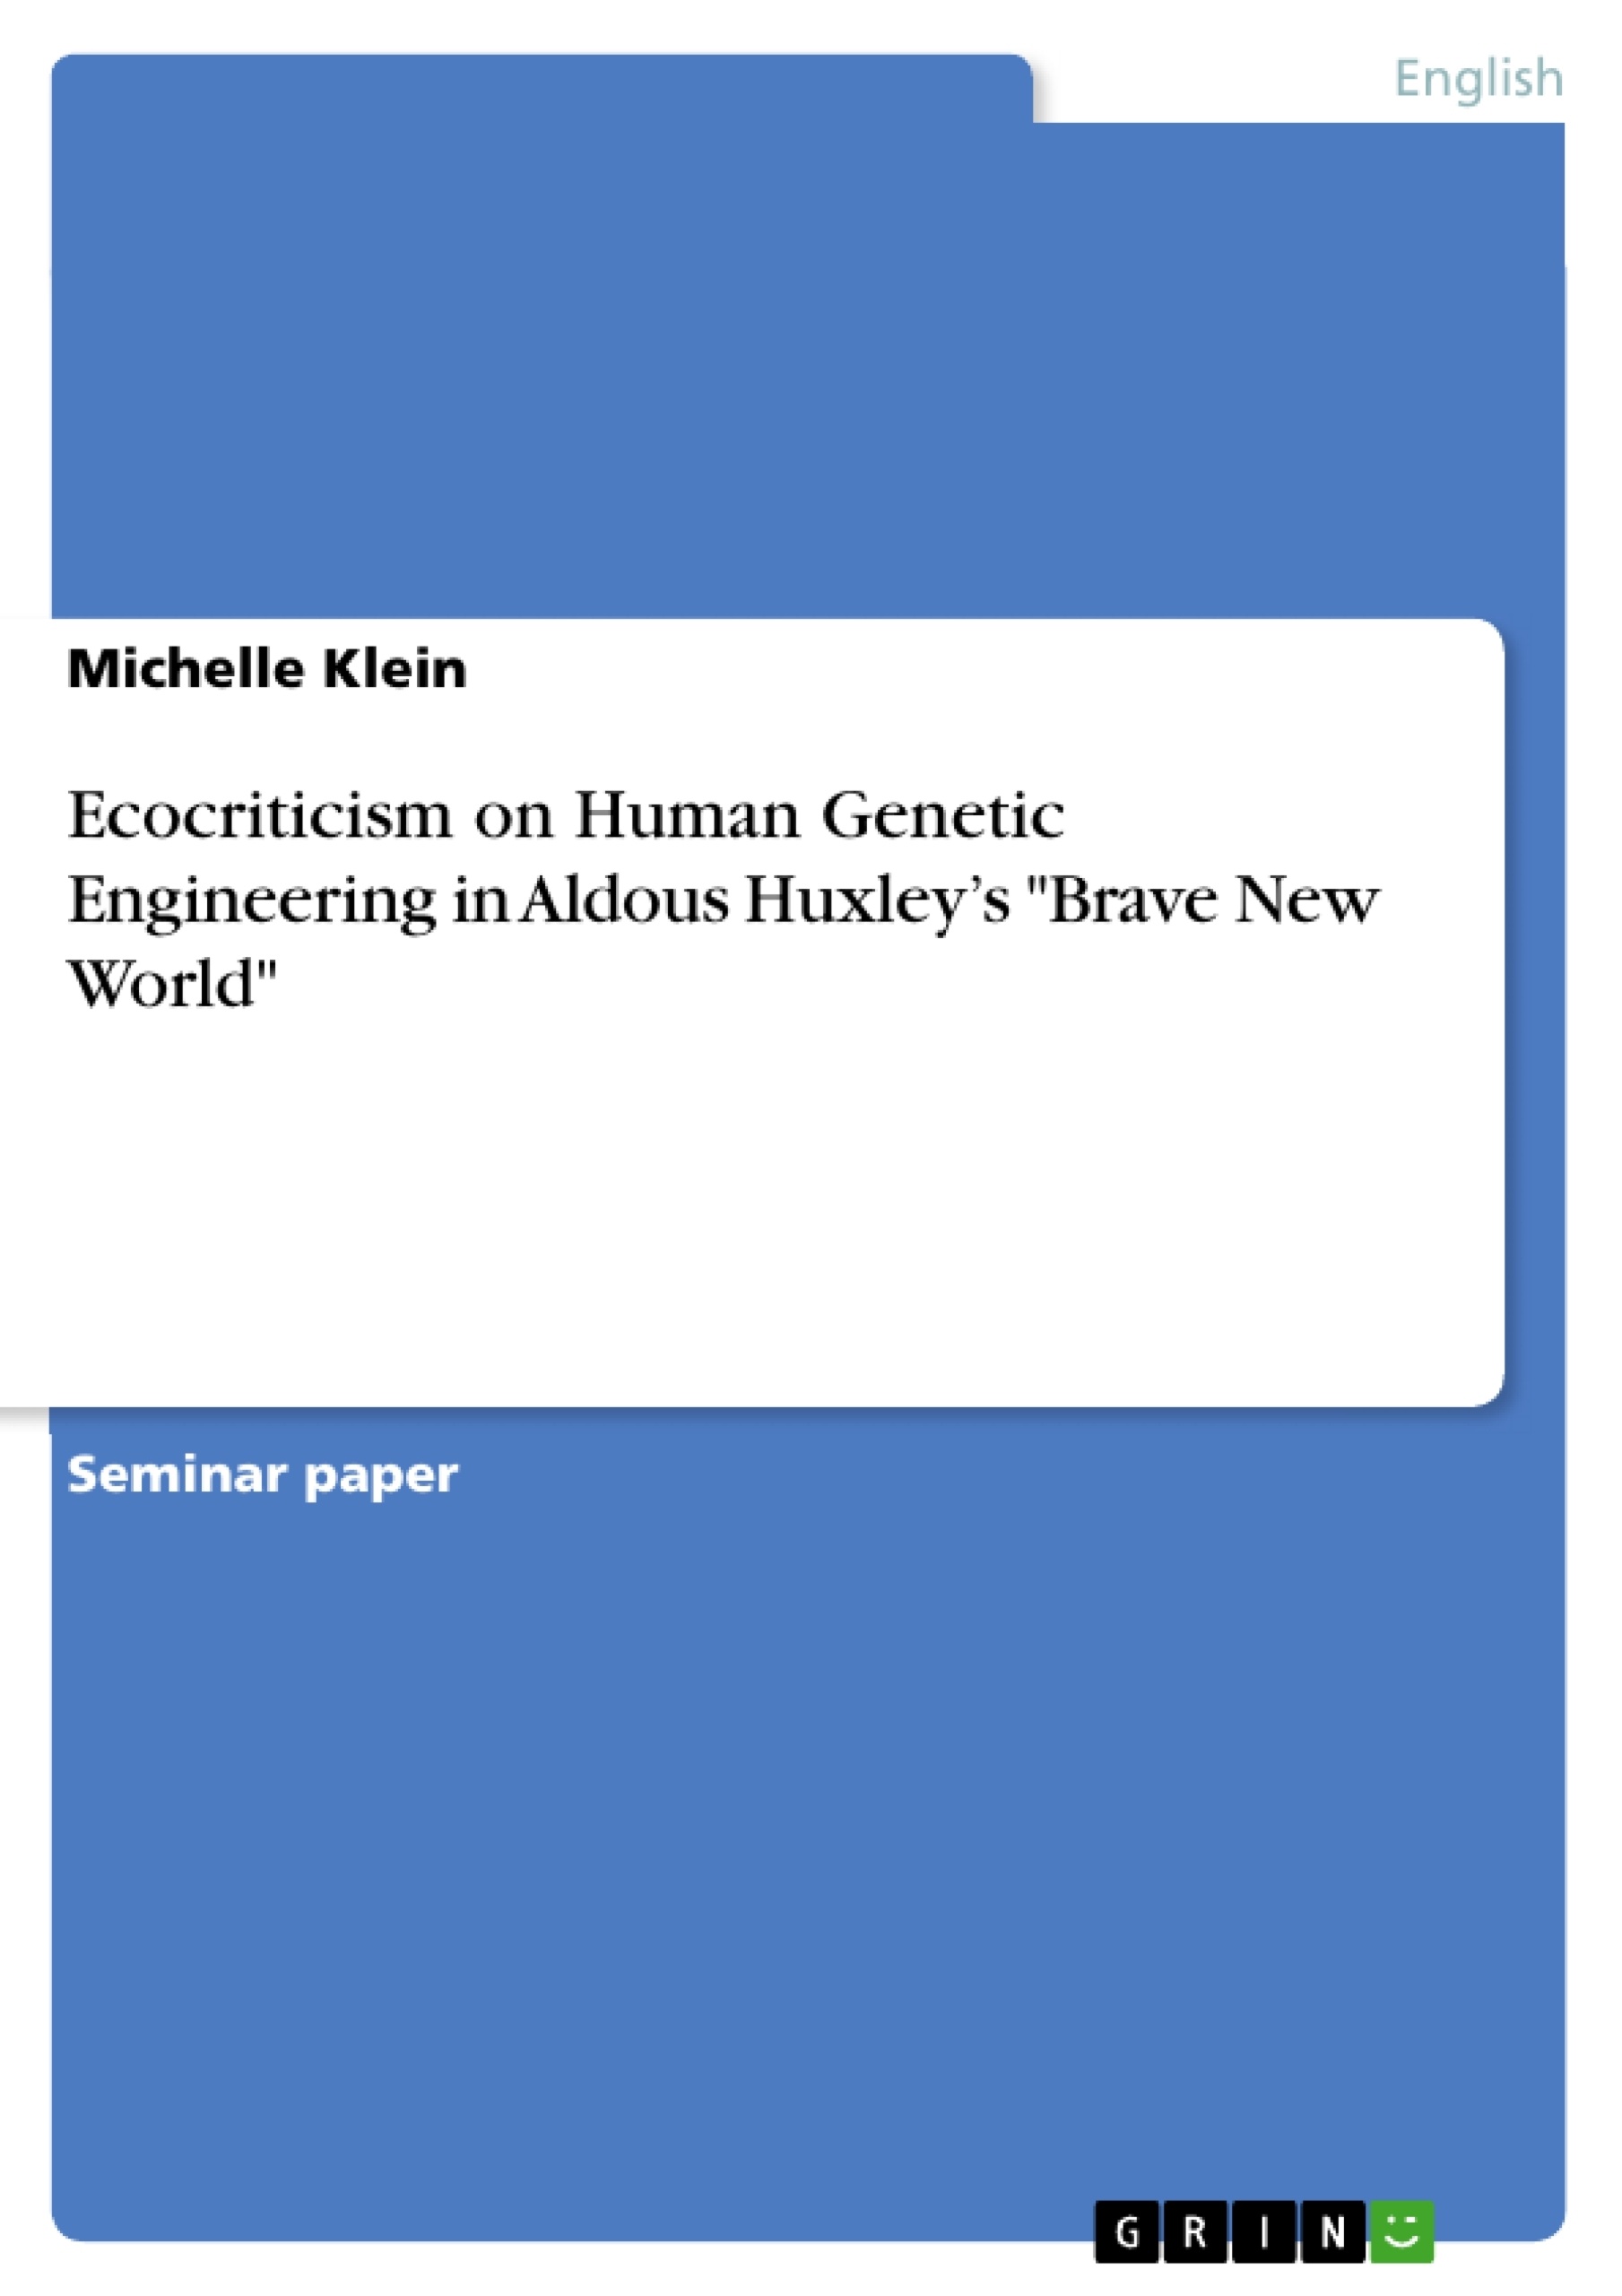 Title: Ecocriticism on Human Genetic Engineering in Aldous Huxley’s "Brave New World"